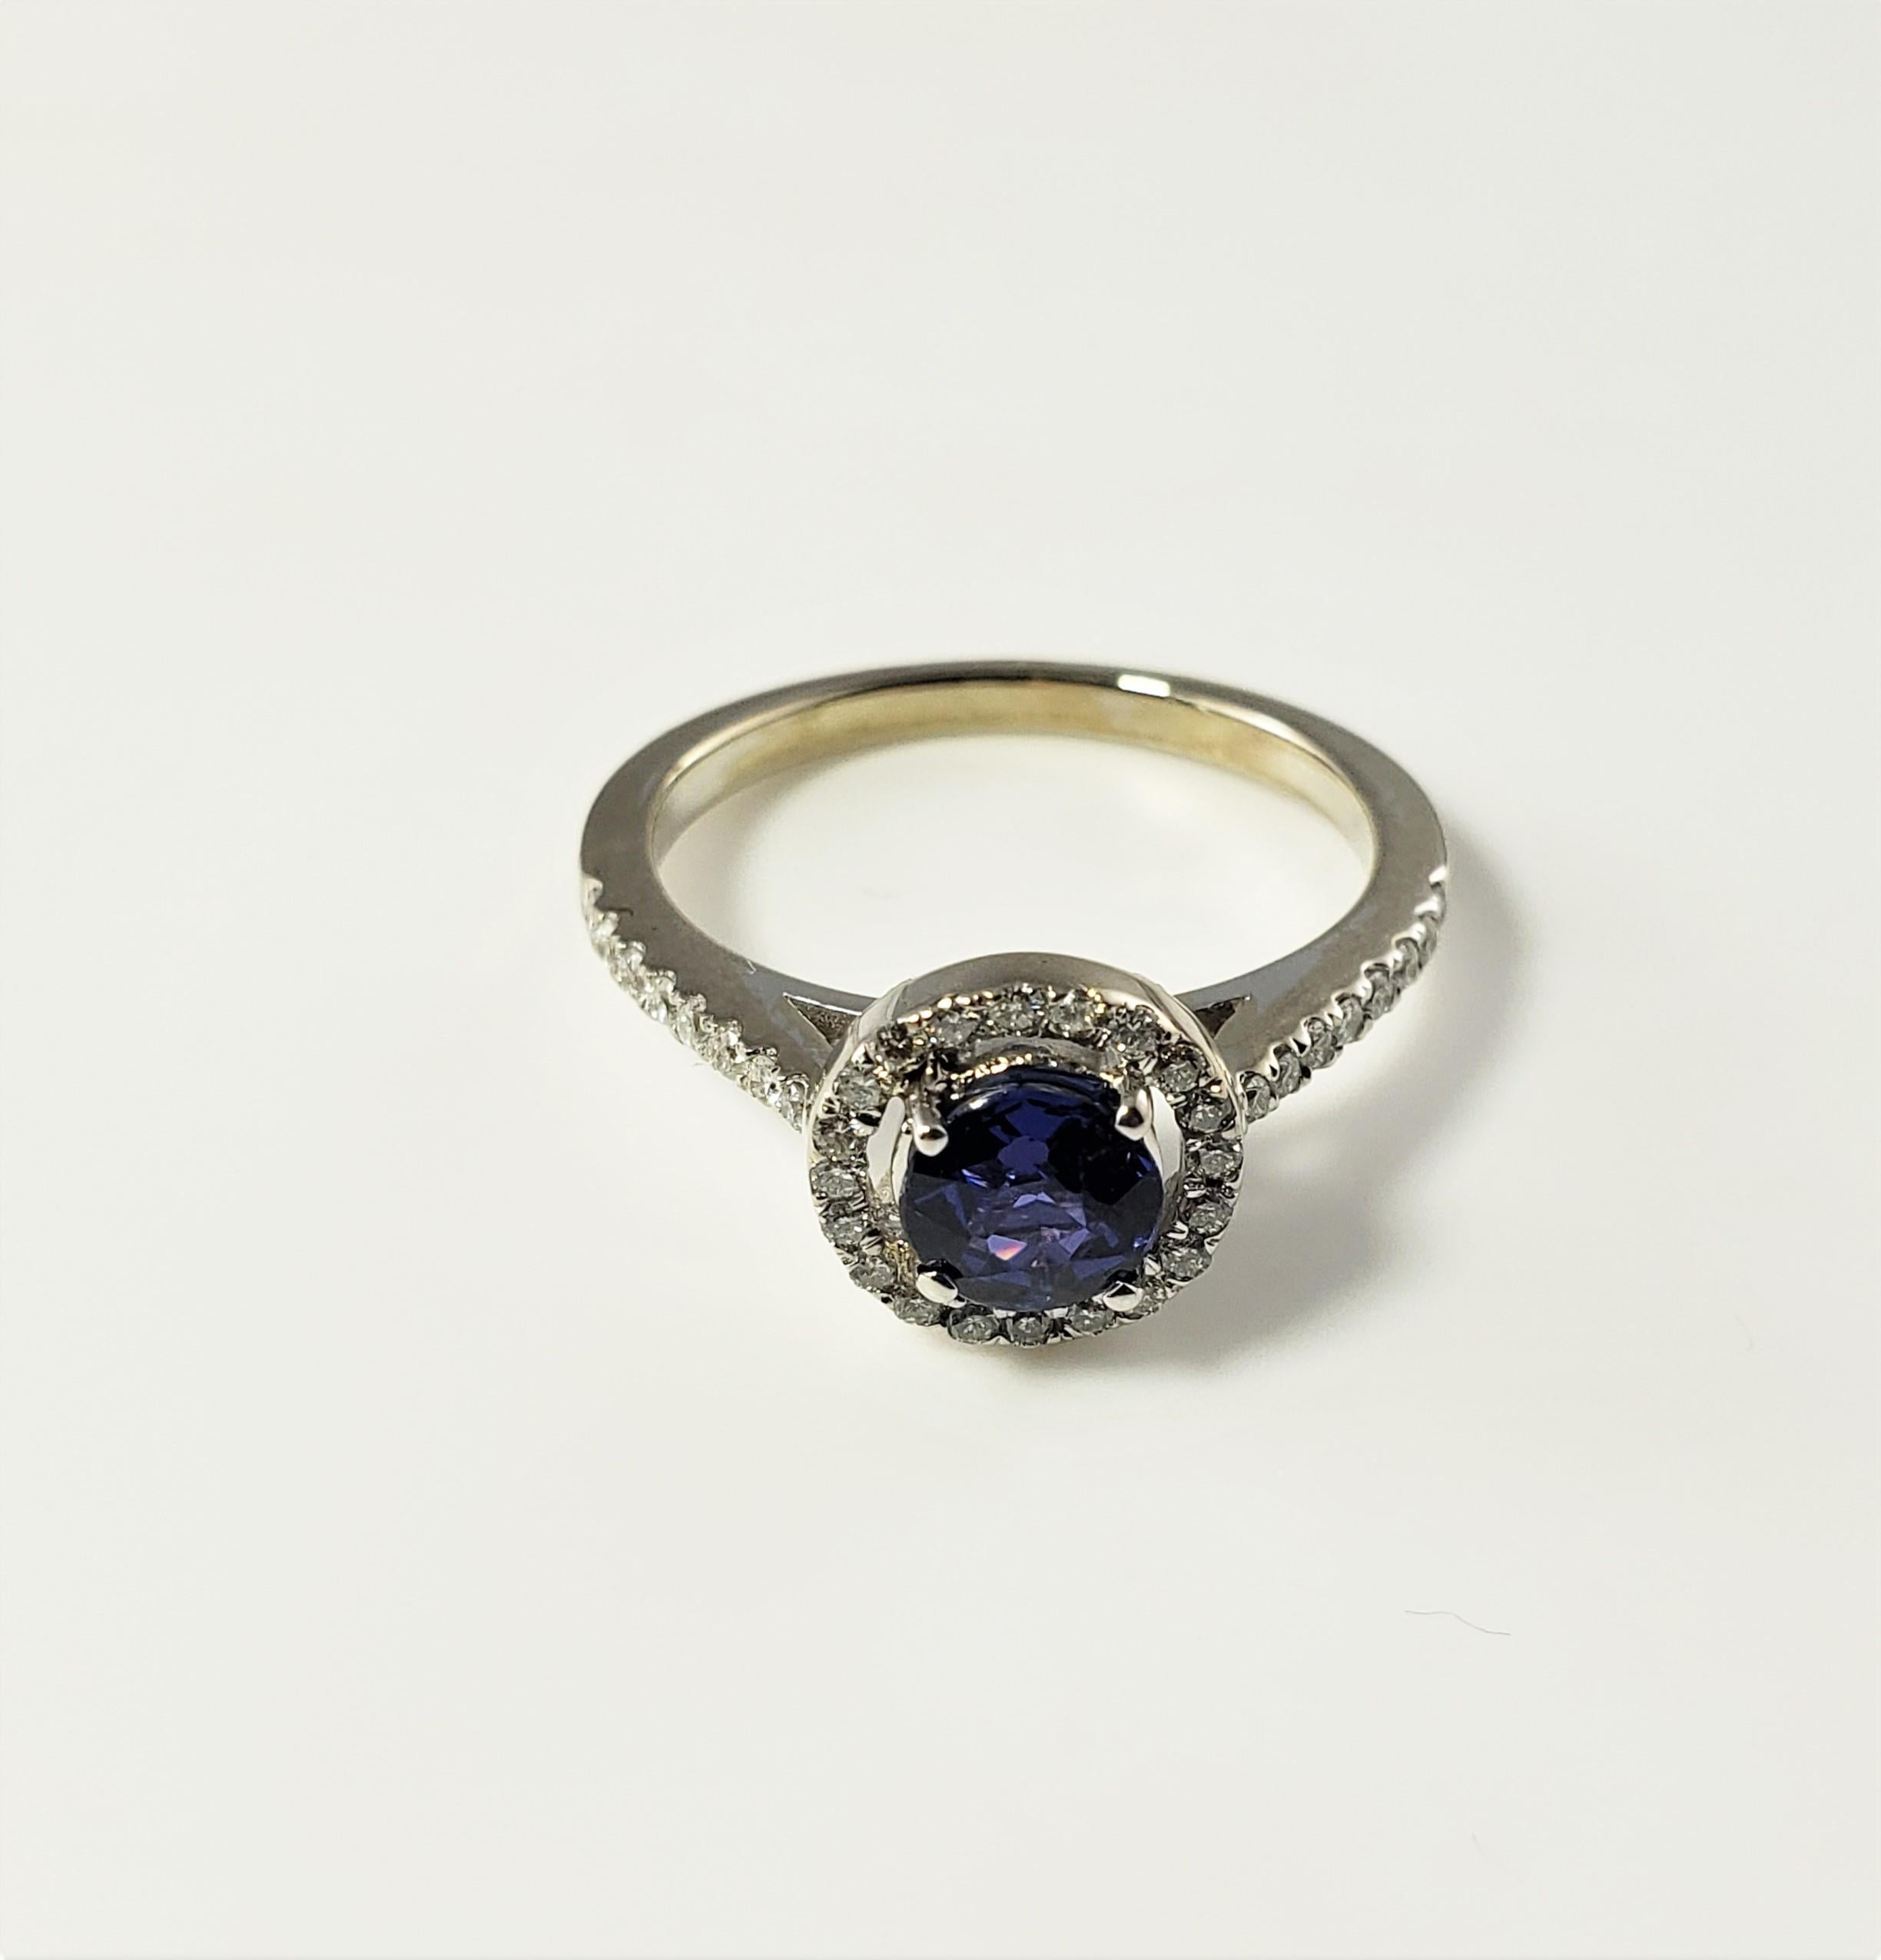 18 Karat White Gold Sapphire and Diamond Ring Size 6.75 GAI Certified-

This sparkling ring features one round sapphire surrounded by 34 round brilliant cut diamonds.  Shank:  2 mm.

Total sapphire weight:  .76 ct.

Sapphire clarity grade: 